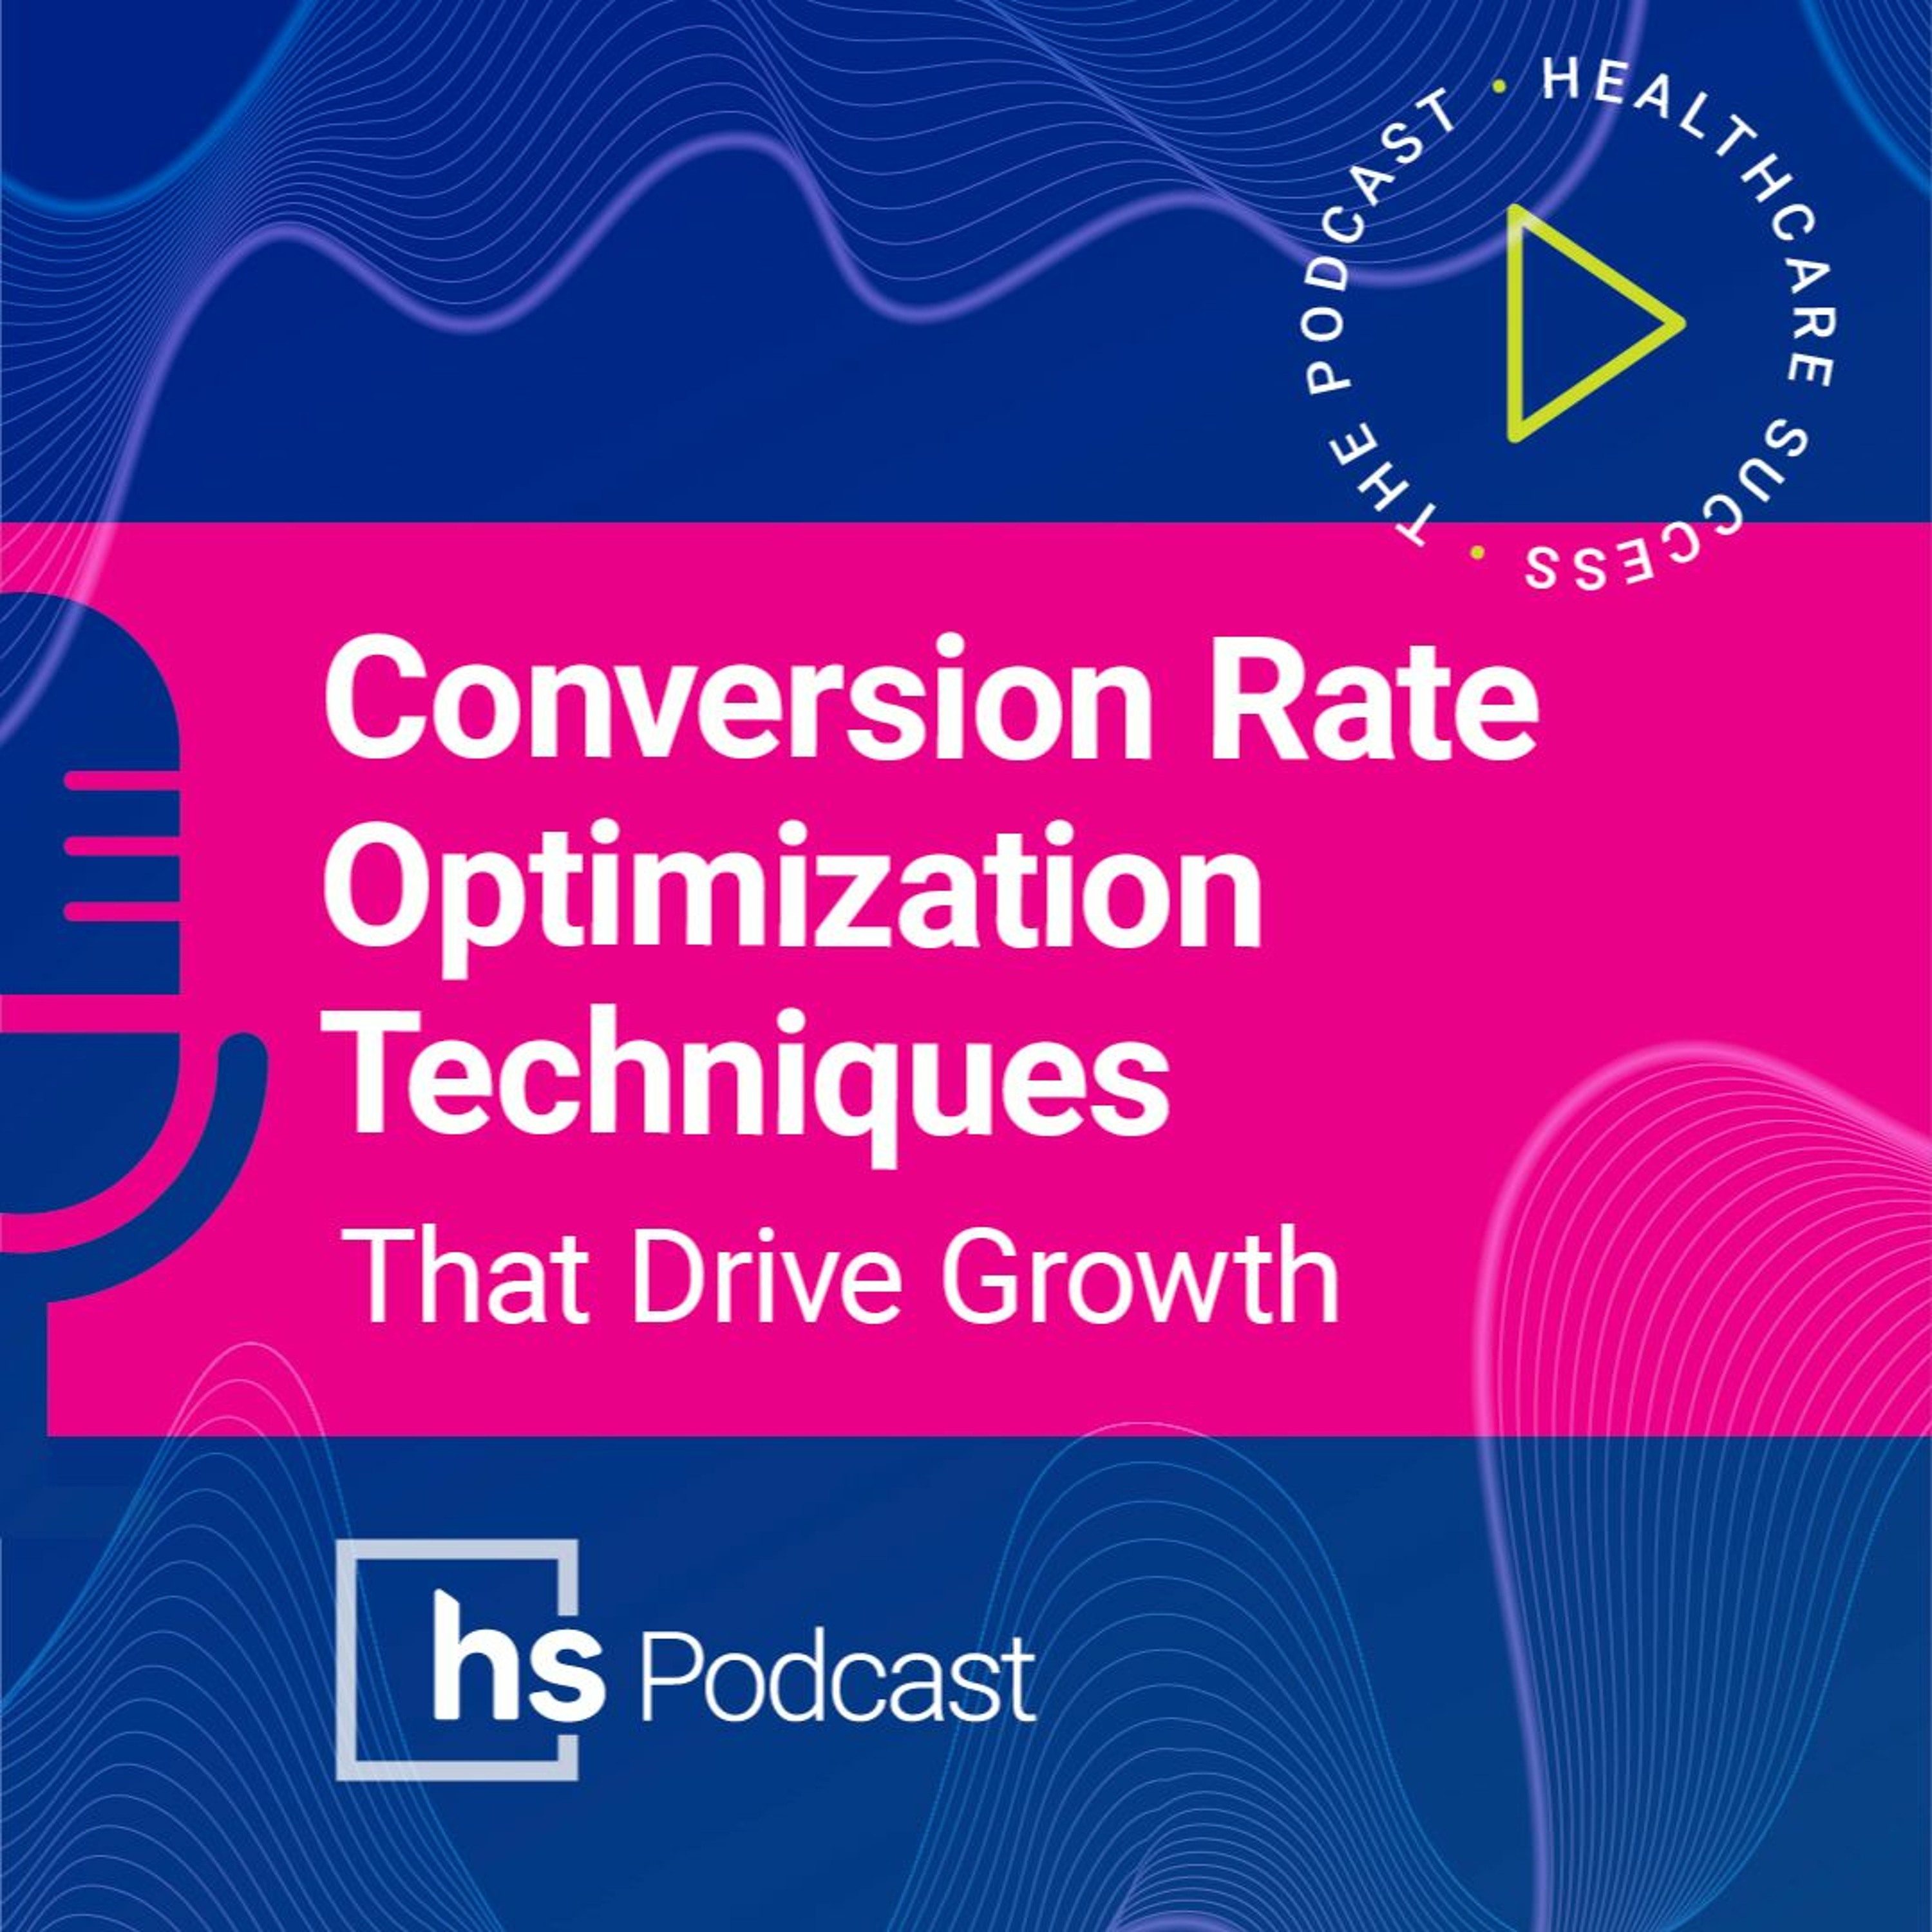 Convert More Healthcare Consumers with Modern Conversion Rate Optimization Techniques